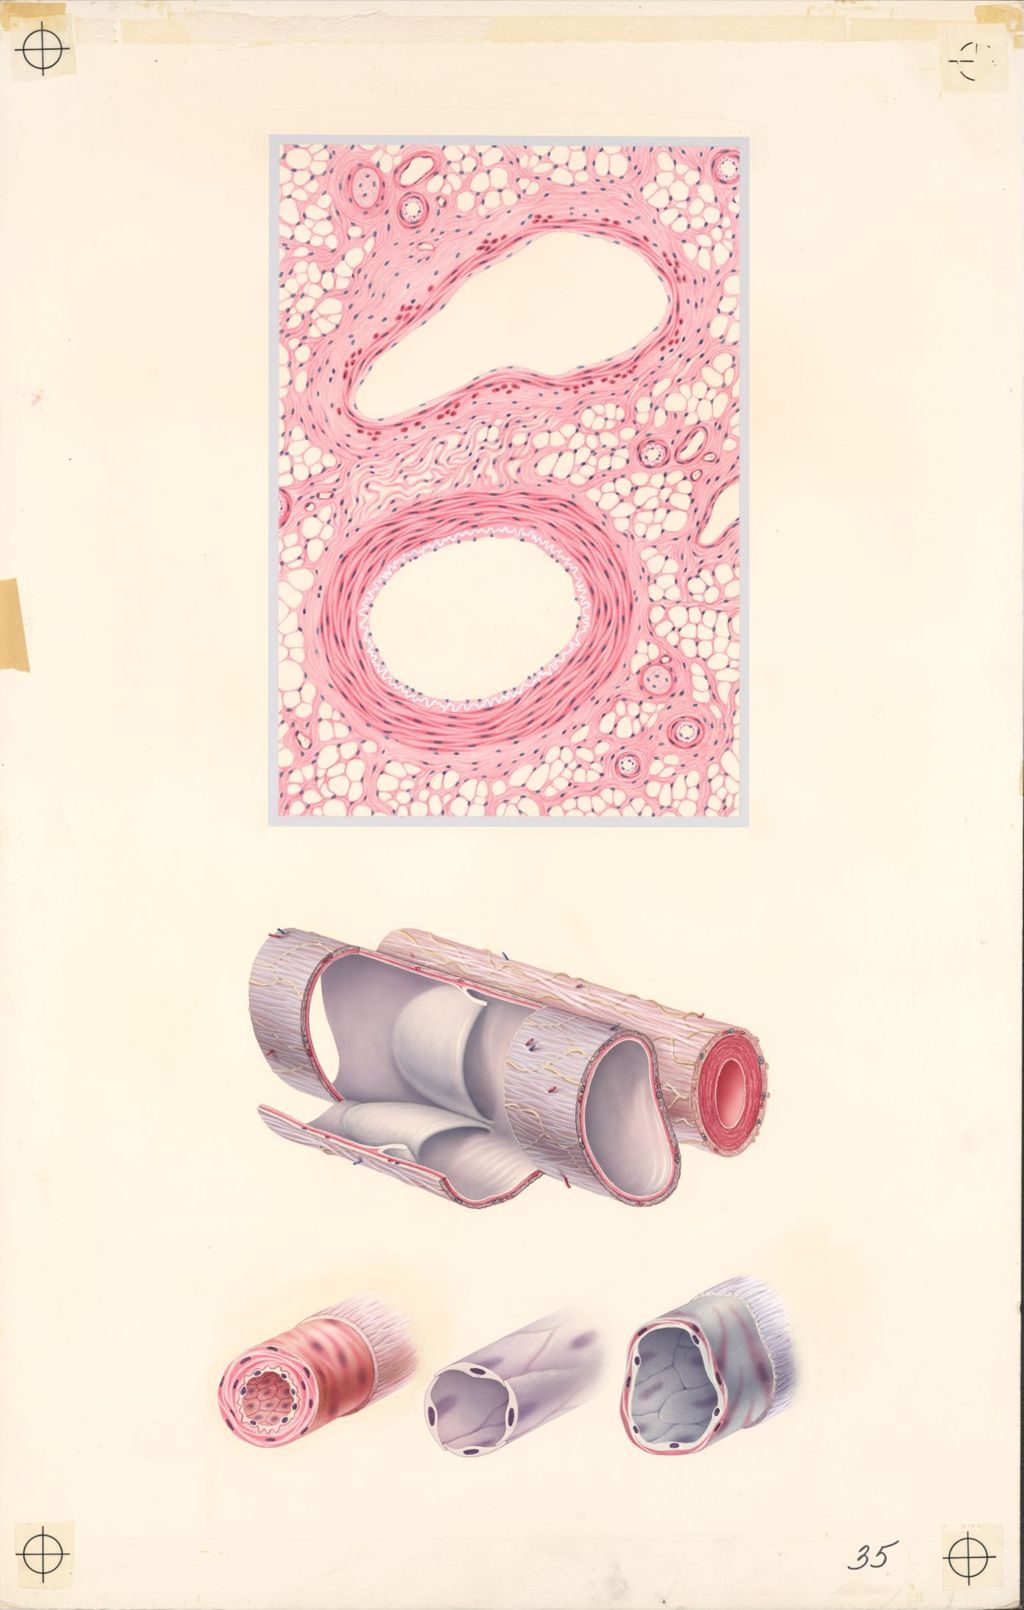 Miniature of Medical Profiles, Anatomy of Blood Vessels, Plate I